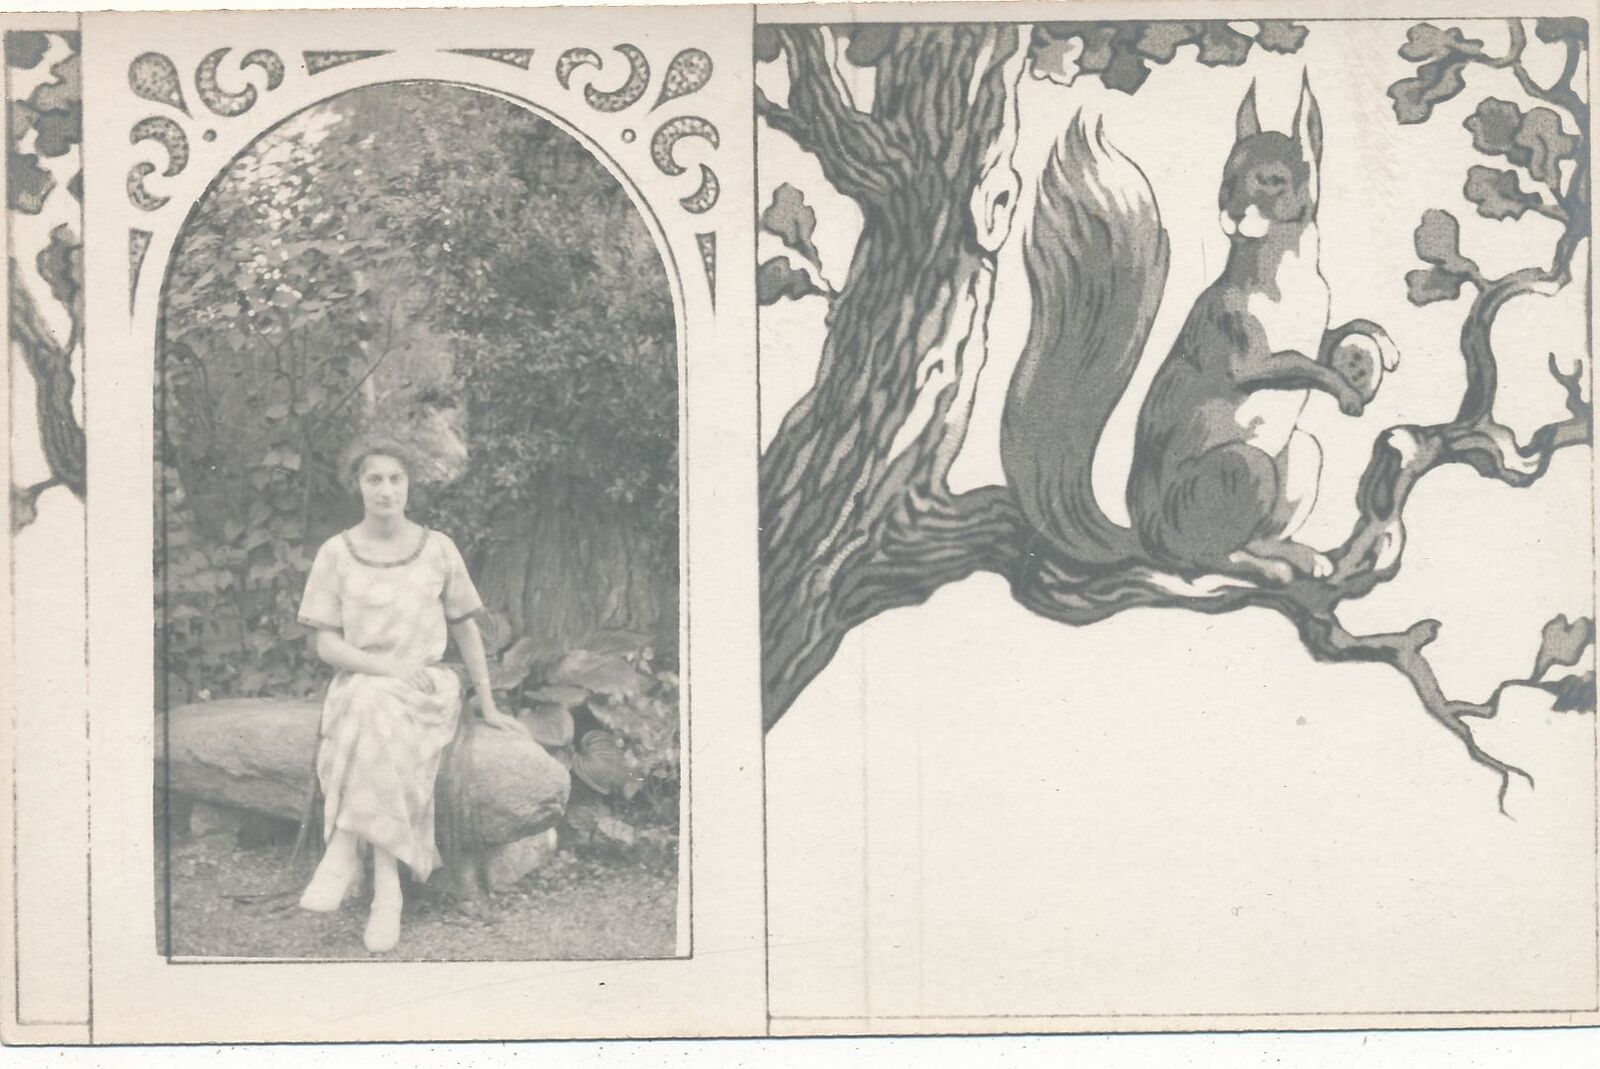 Woman Sitting Real Photo Postcard With Squirrel In Tree Design Postcard